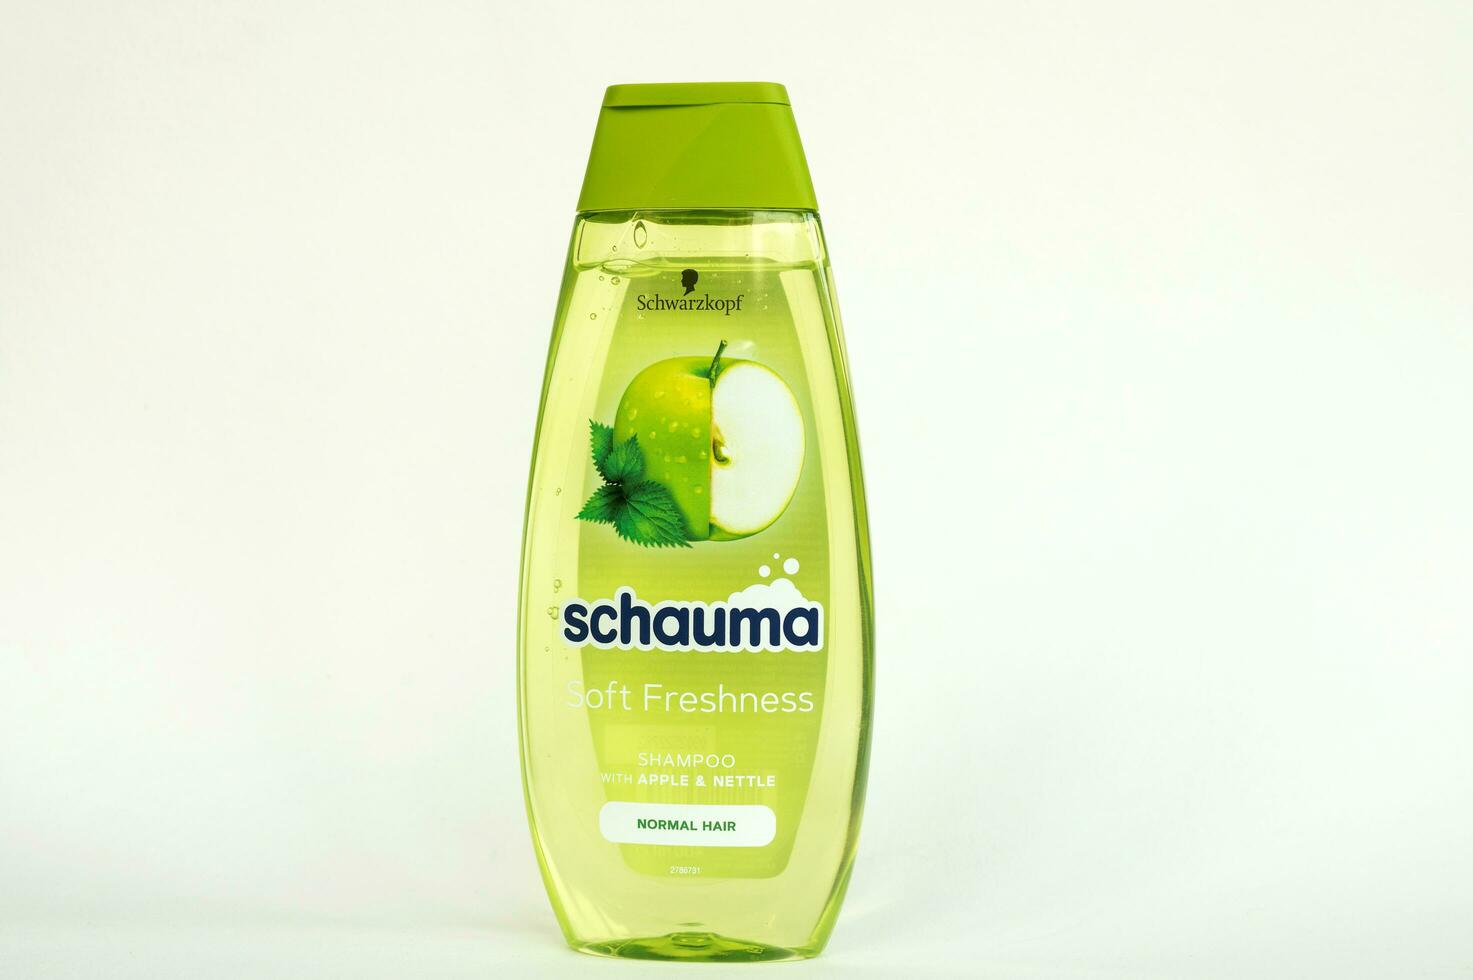 Rome, Italy. April 2023. Shampoo for hair with apple flavor and nettle extract from Schwarzkopf. photo